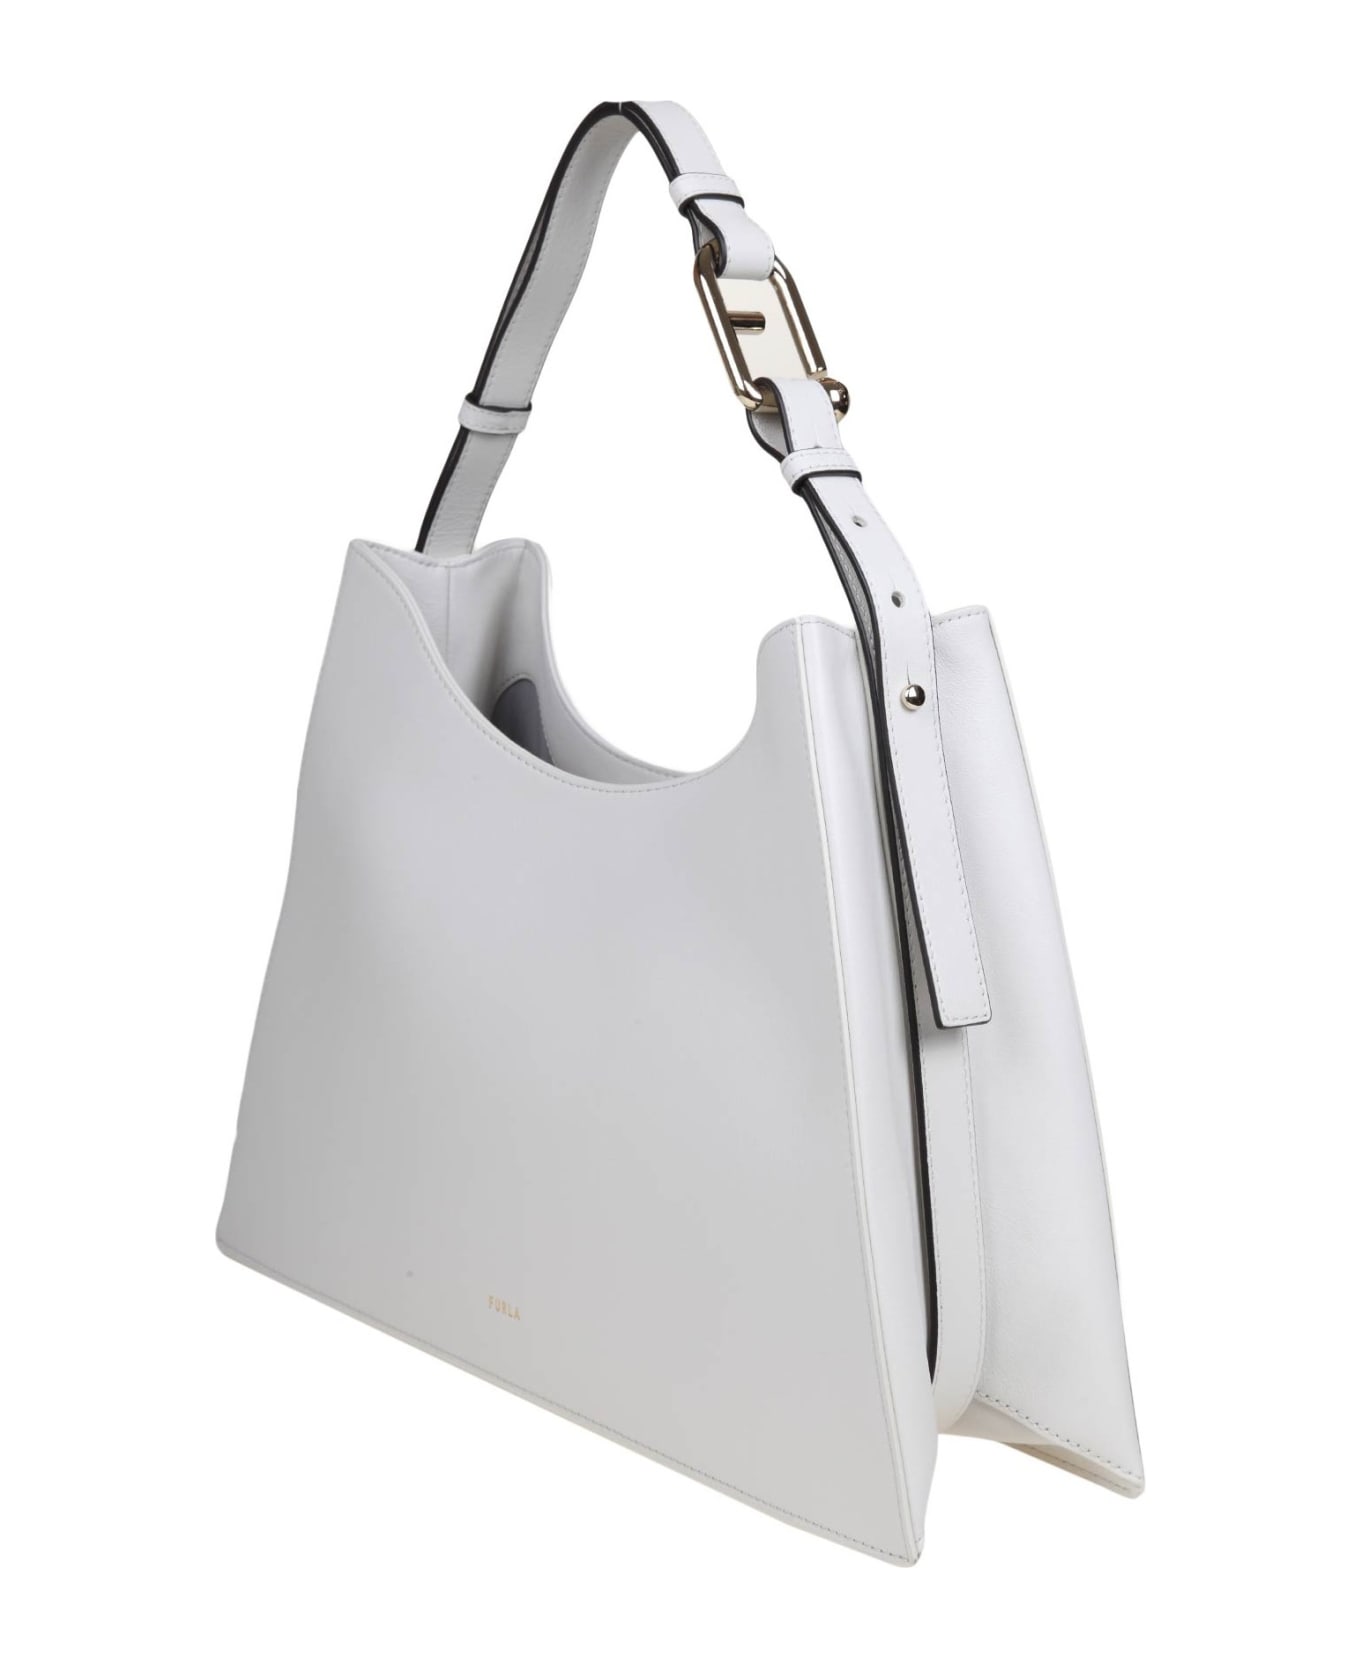 Furla Nuvola Shoulder Bag In Marshmallow Color Leather - Marshmallow ショルダーバッグ